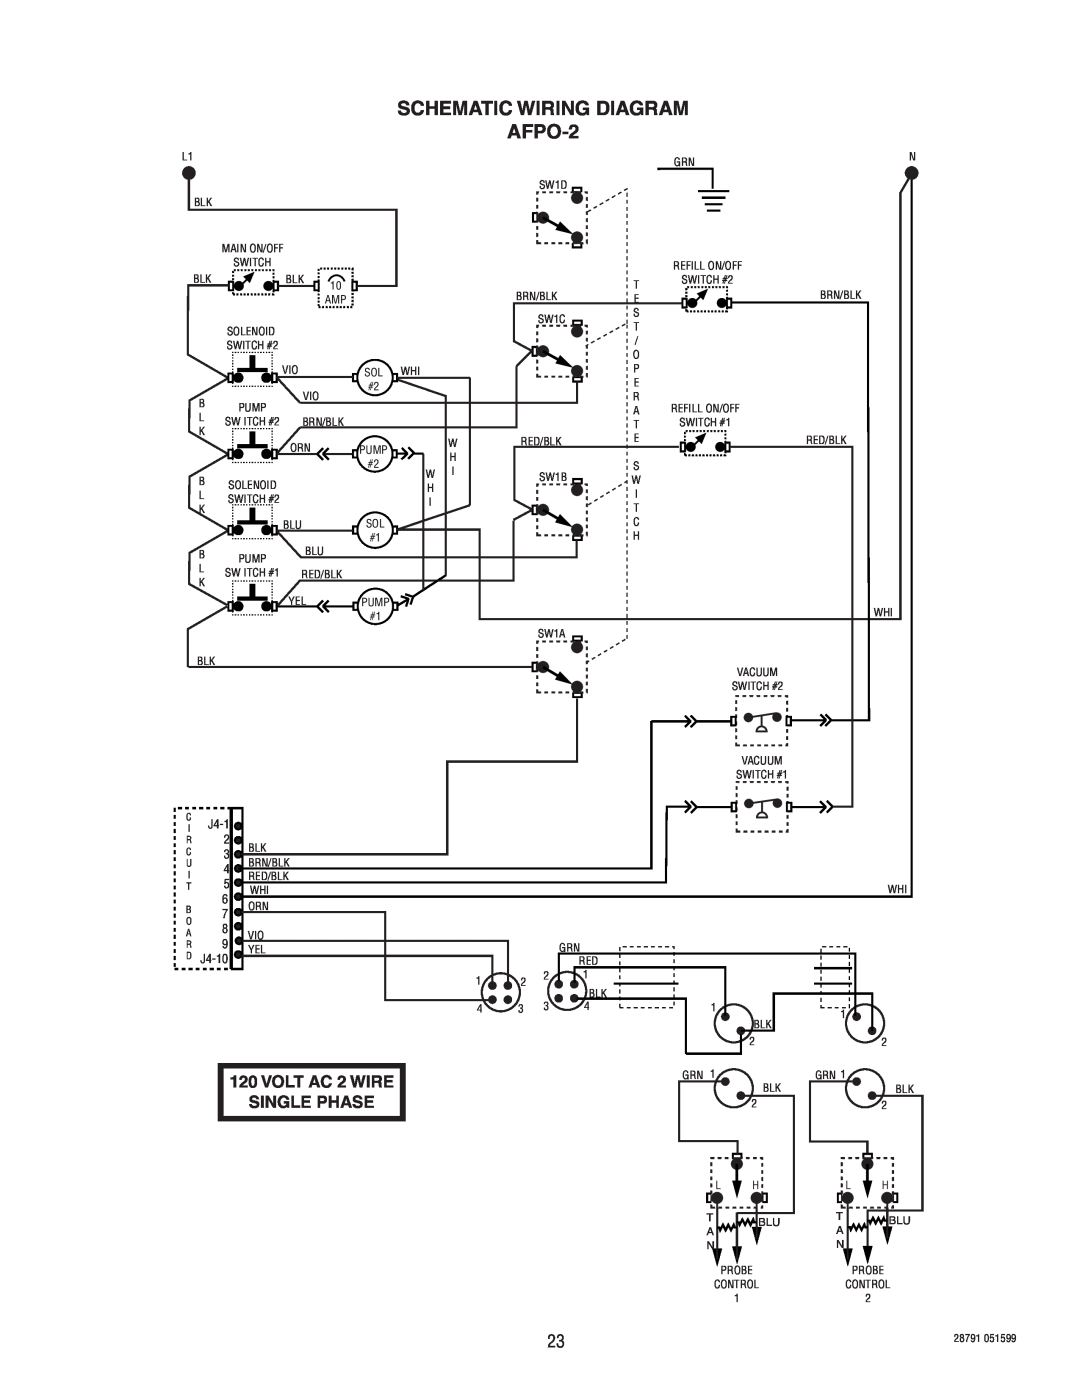 Bunn AFPO-3, AFPO-2 SL service manual SCHEMATIC WIRING DIAGRAM AFPO-2, VOLT AC 2 WIRE SINGLE PHASE 